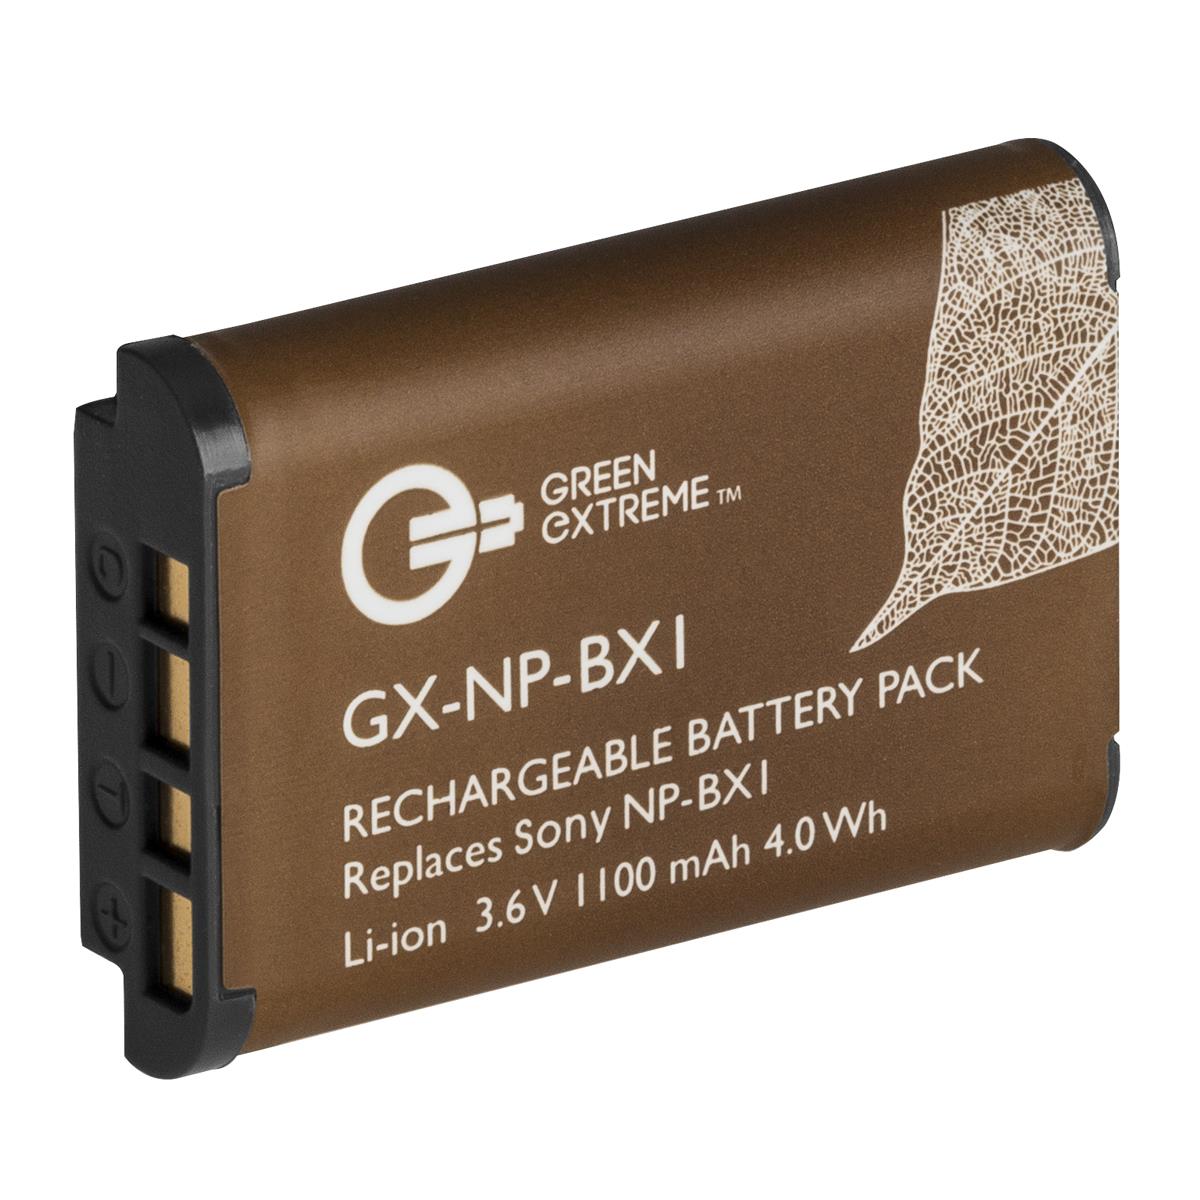 Image of Green Extreme NP-BX1 Battery Pack